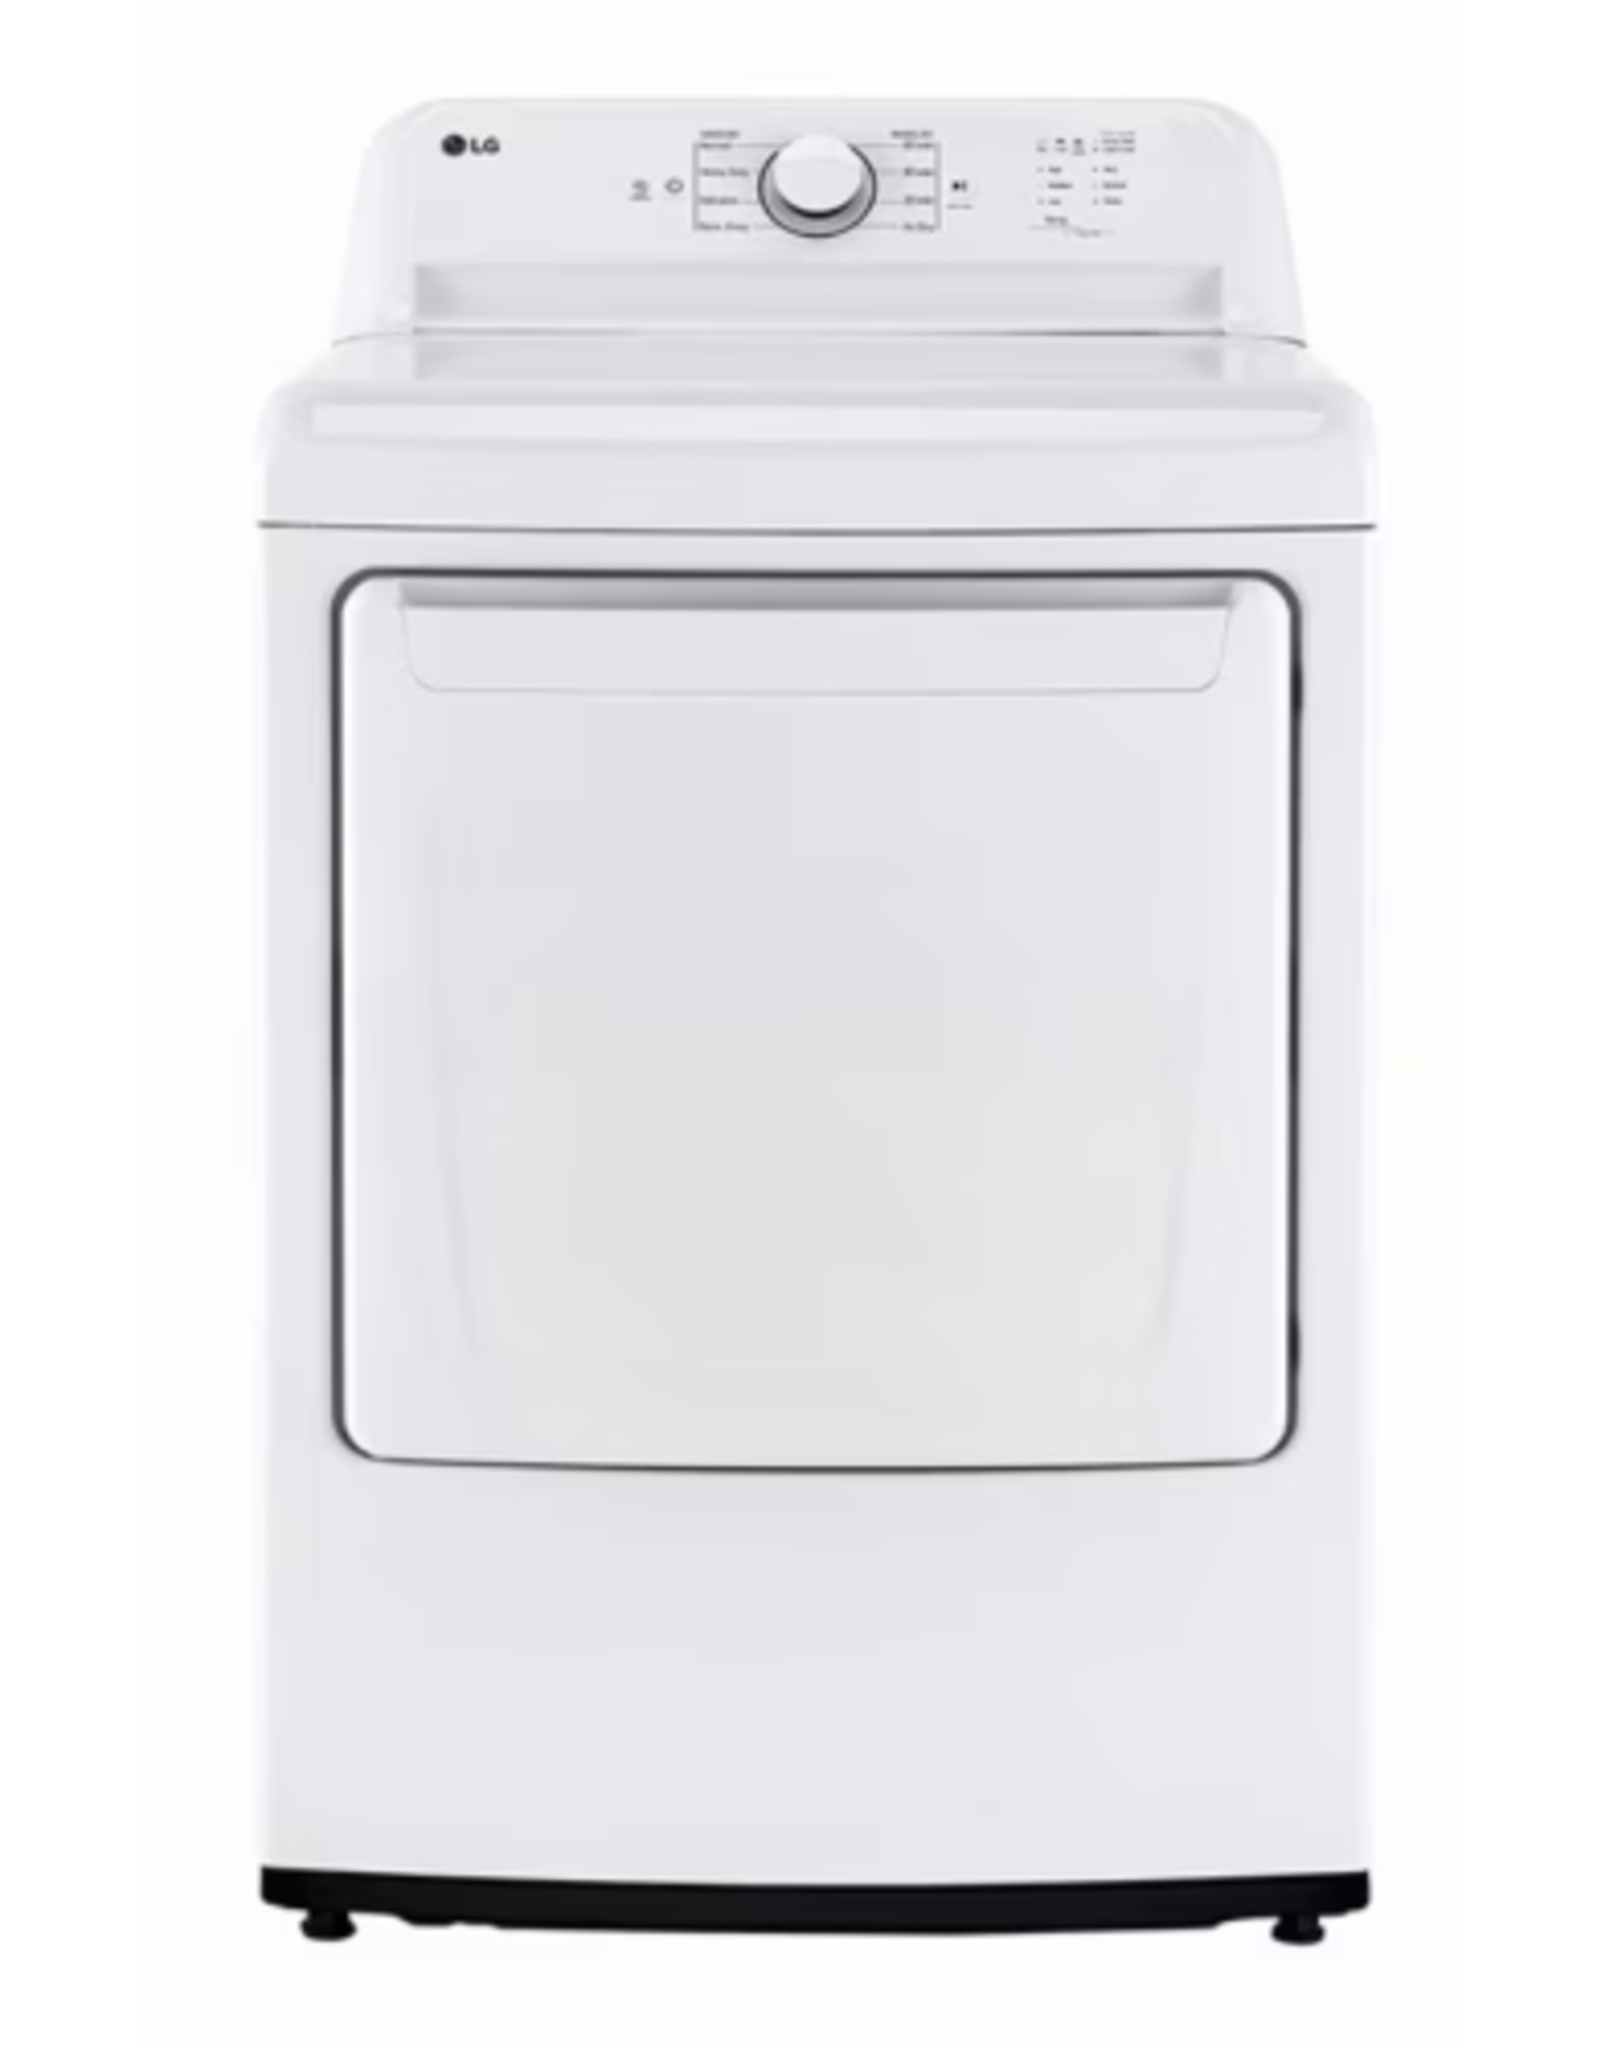 lg DLG6101W  7.3 Cu.Ft. Vented Gas Dryer in White with Sensor Dry Technology